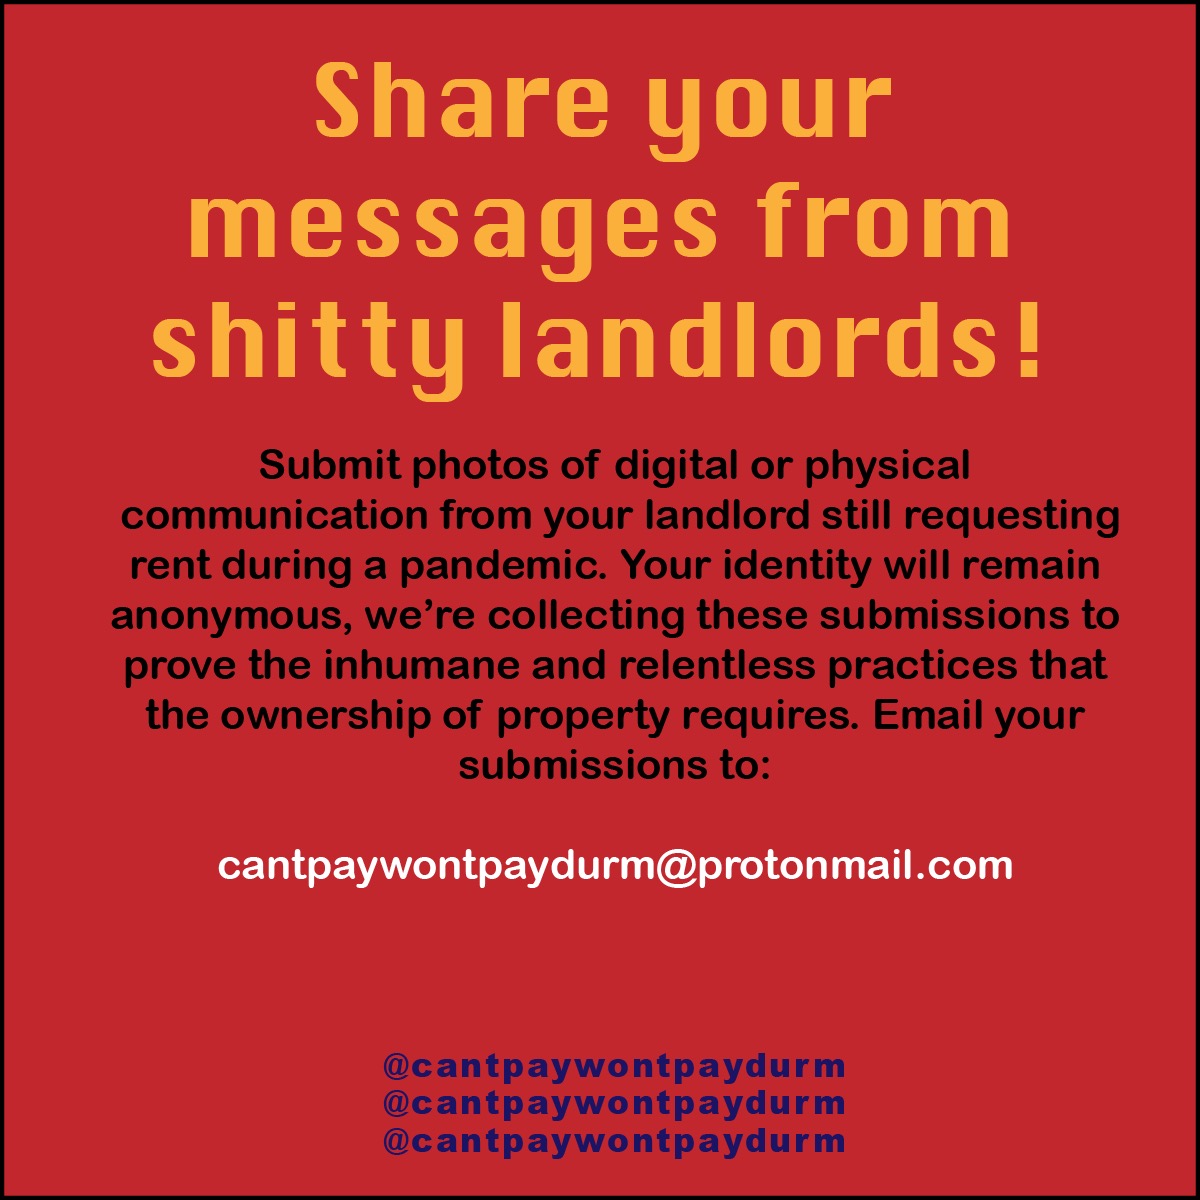 If you get messages from a shitty landlord that you want to put them on blast, send us a screenshot! The public pressure is just beginning. Also, for compilation of resources, form letters to landlords, & legal tips, check out cantpaywontpaydurm.org #cantpaywontpay #werefuse